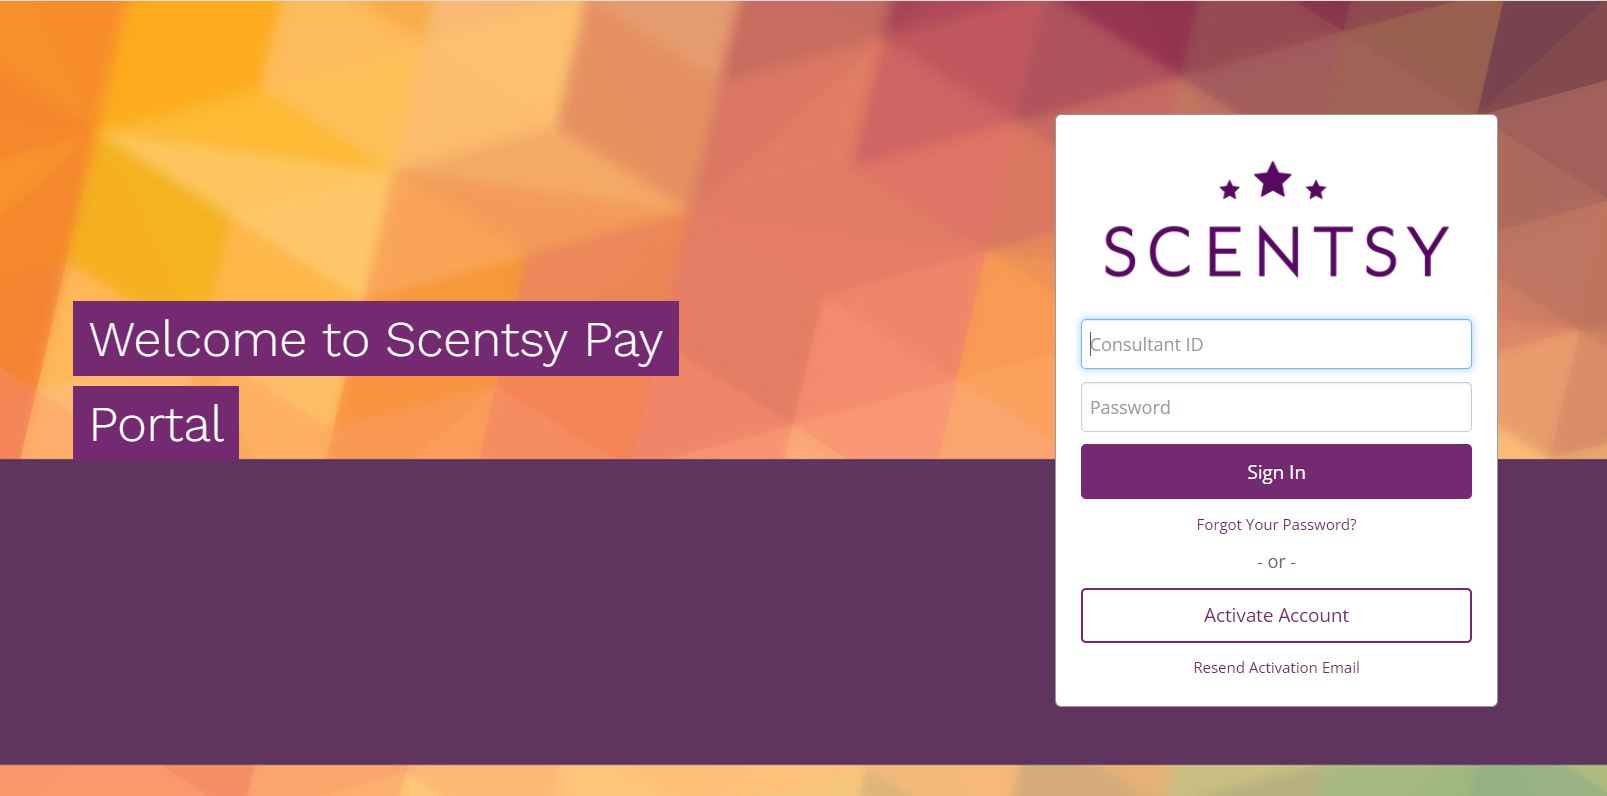 Screenshot of the Scentsy Pay Portal website shows the sign in page